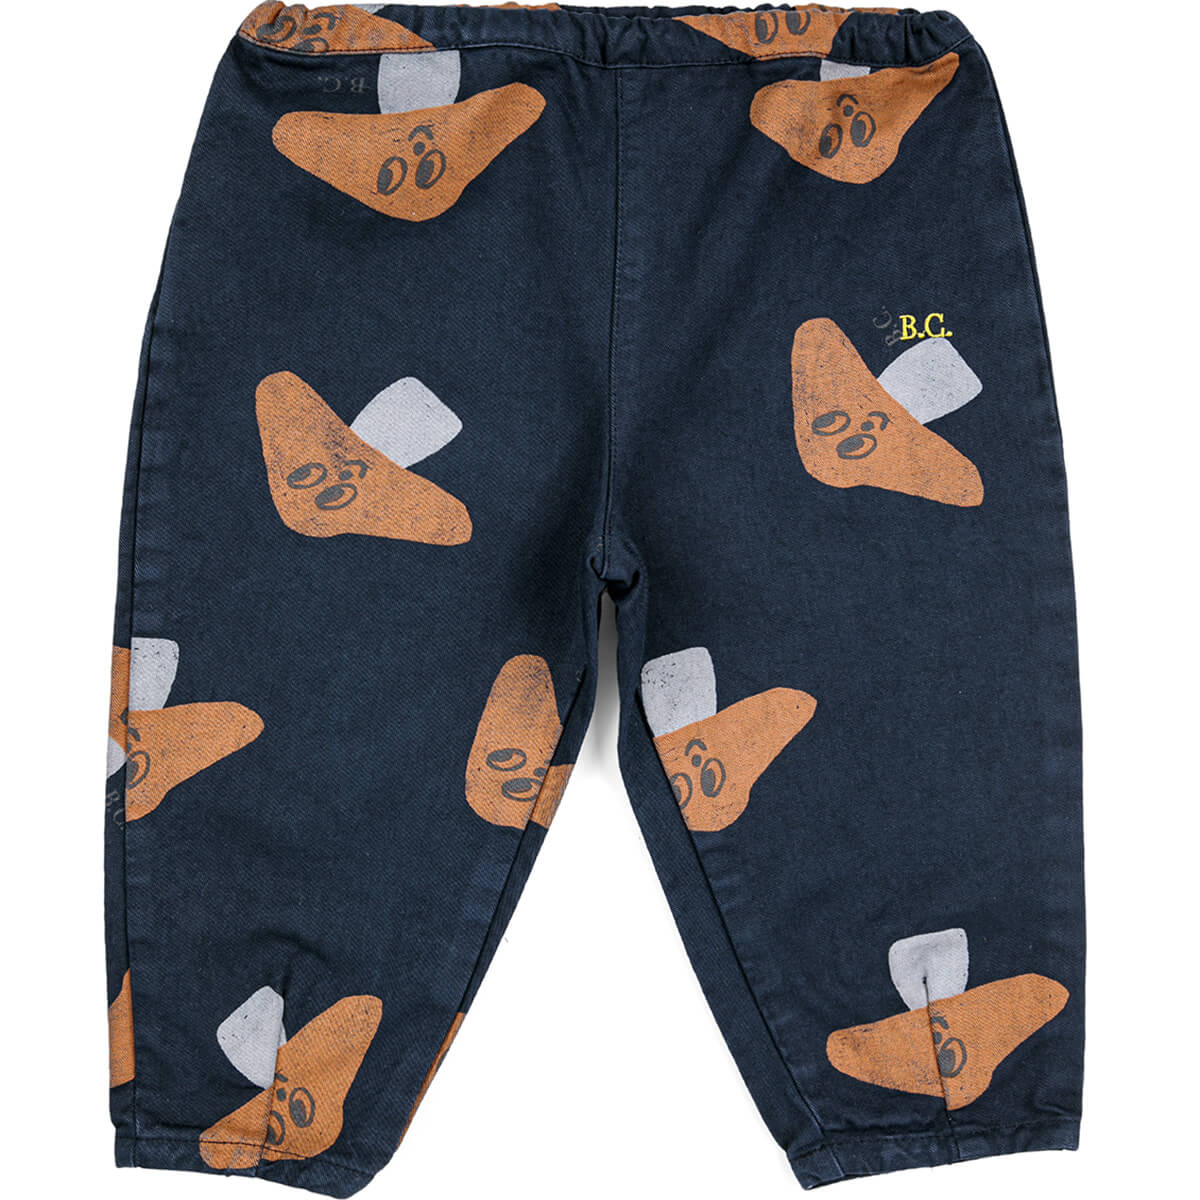 Mr Mushroom All Over Baby Woven Pants by Bobo Choses – Junior